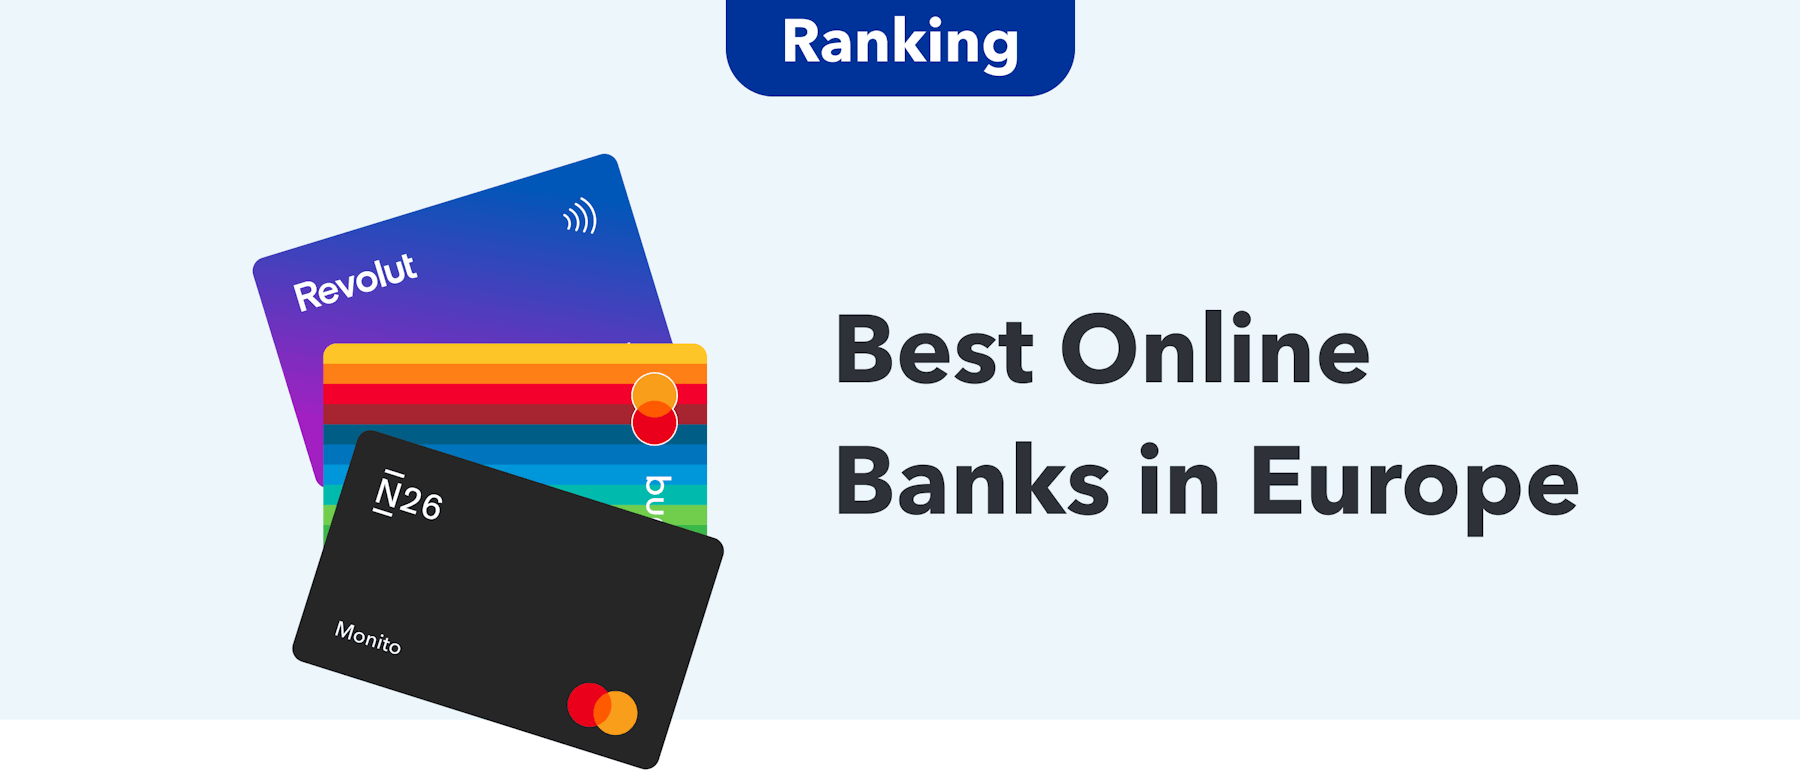 Revolut, Bunq and N26 among the best online banks in Europe tested by Monito